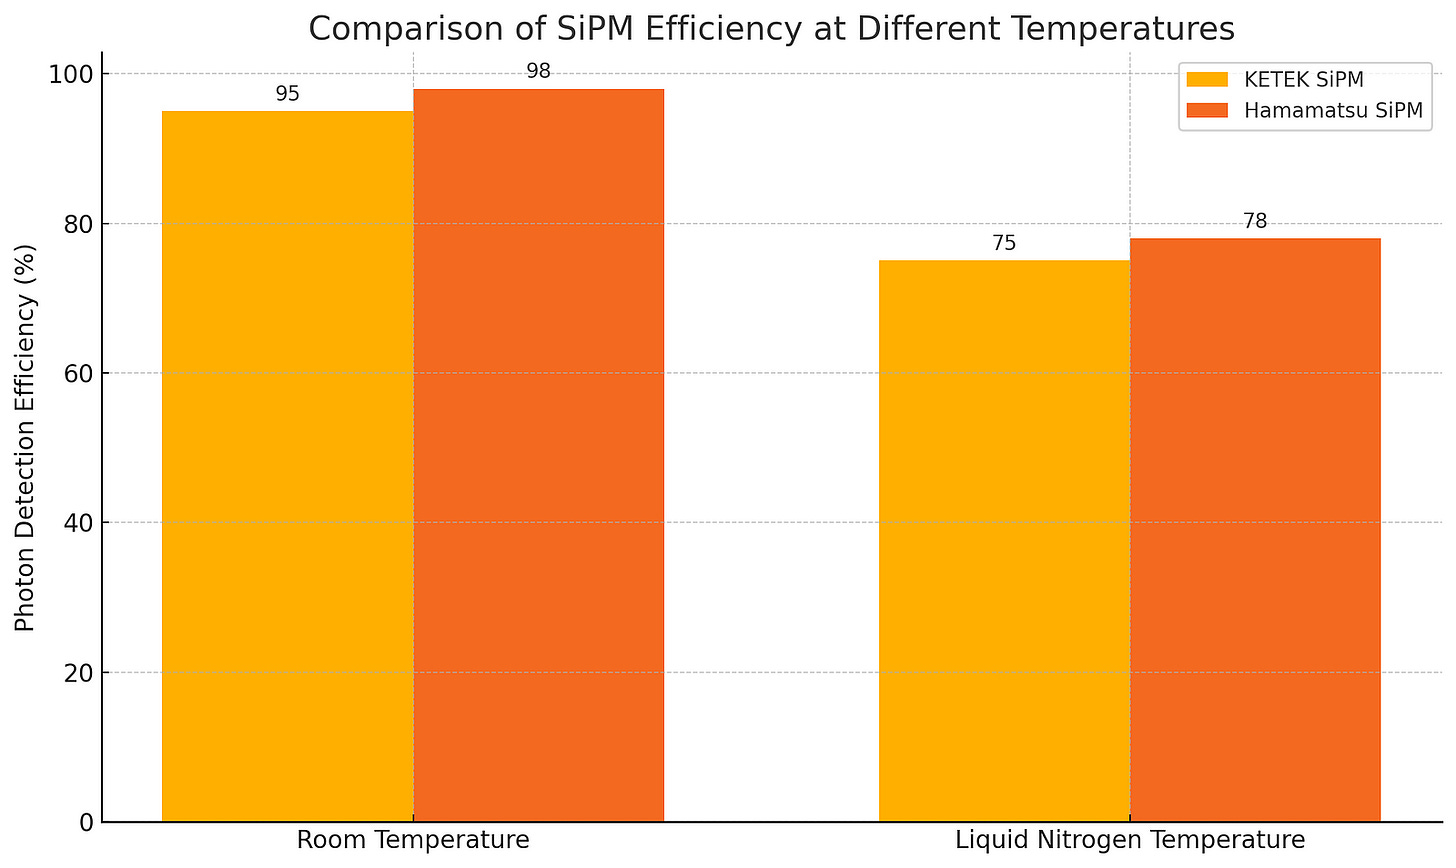 Bar graph comparing the photon detection efficiency of KETEK and Hamamatsu SiPMs at room temperature and liquid nitrogen temperature. Two sets of bars show higher efficiency at room temperature for both SiPM types.